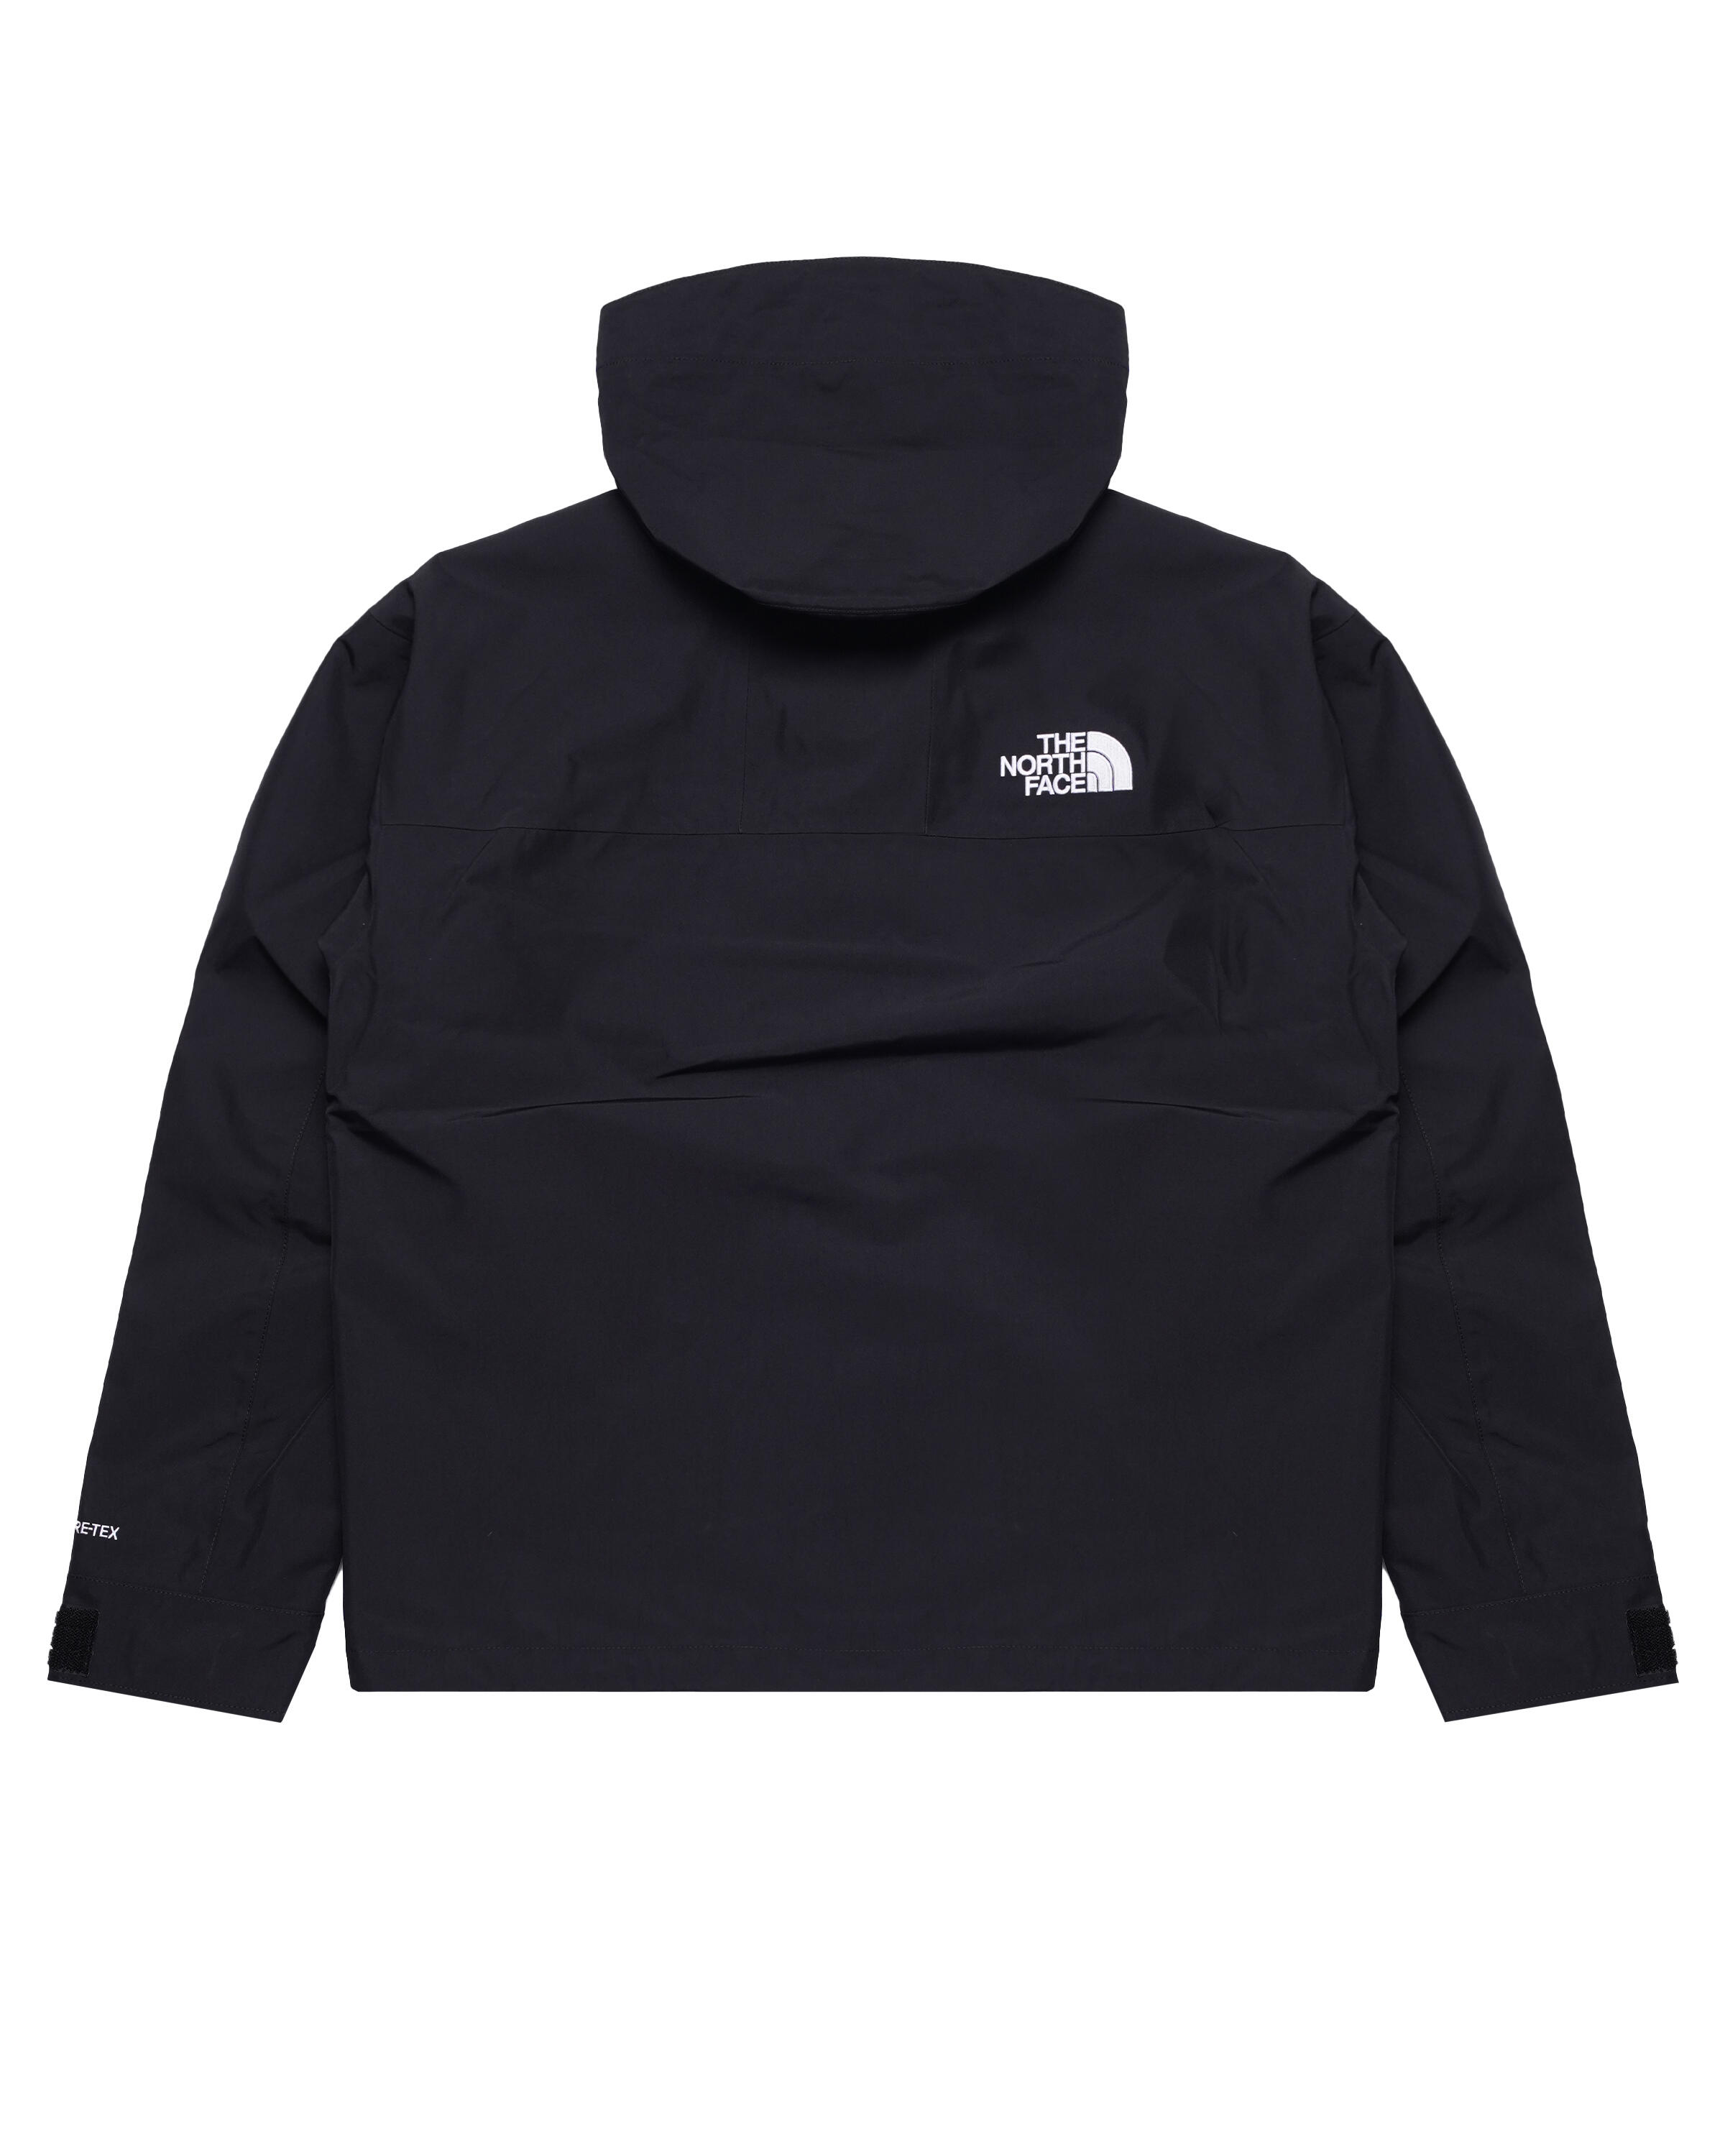 The North Face GORE-TEX MOUNTAIN JACKET